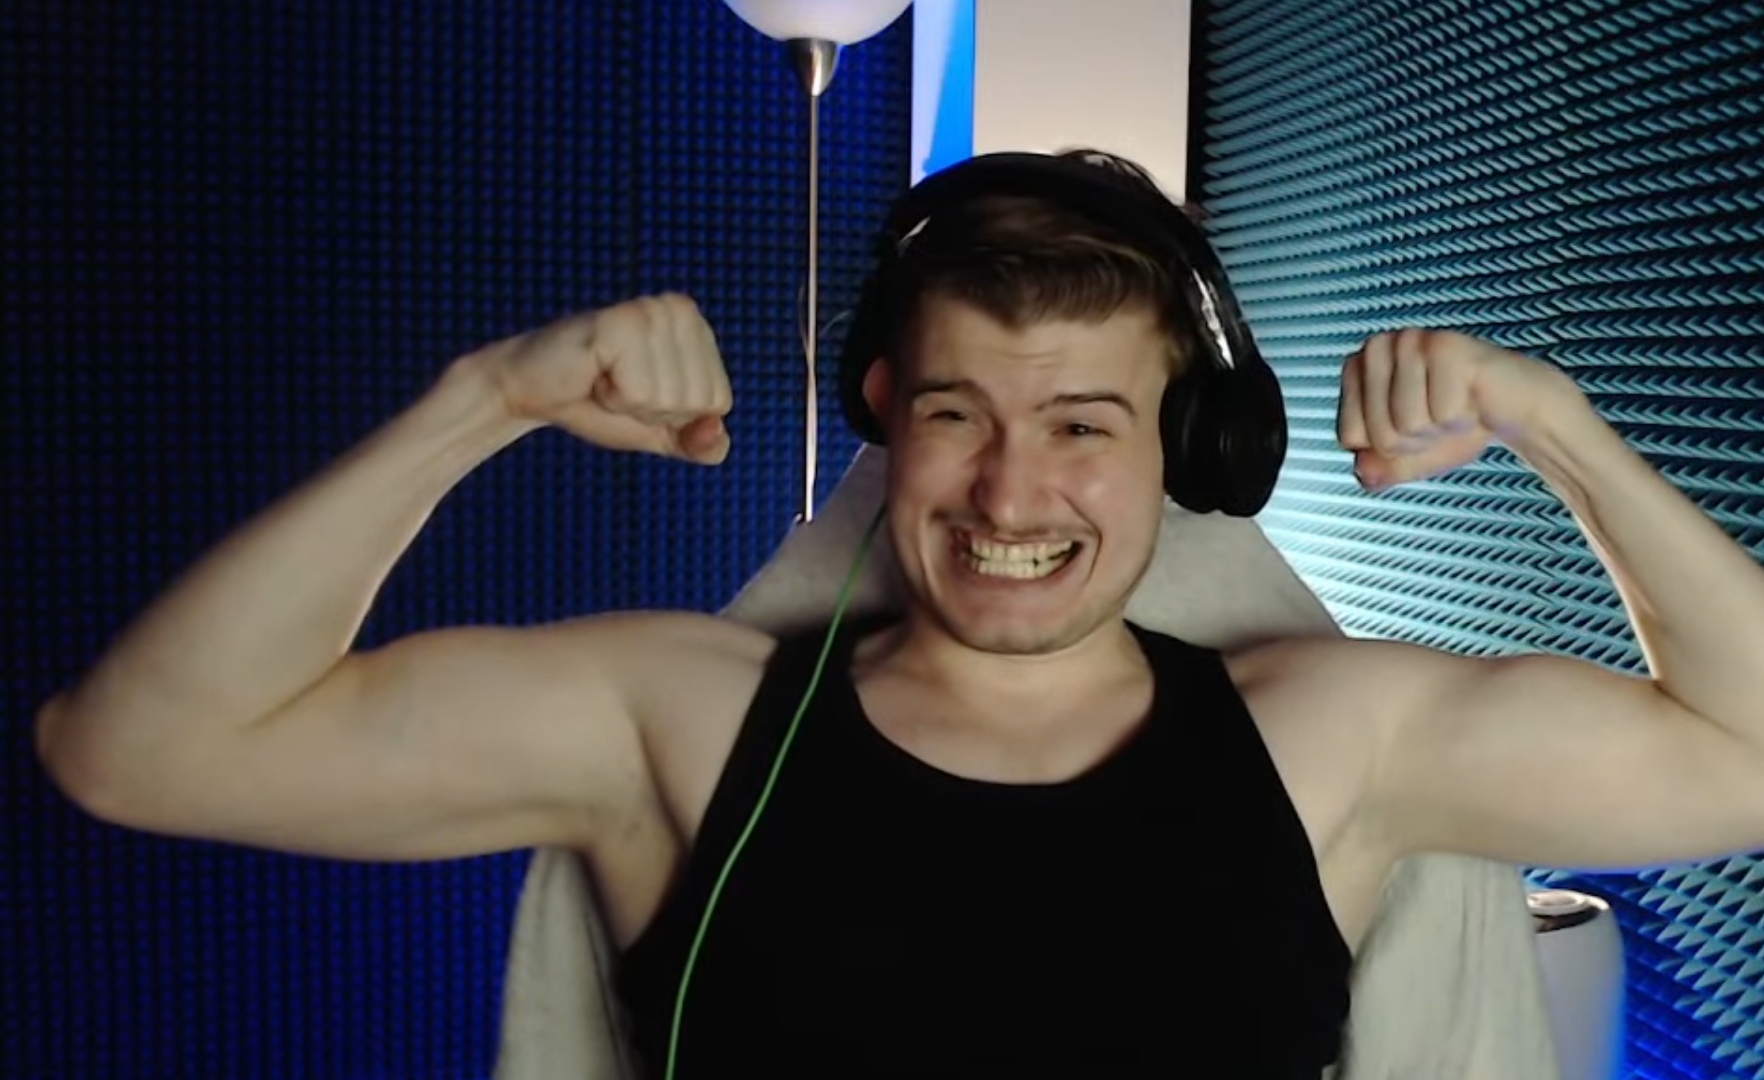 Alpha guy shows off his muscles for you